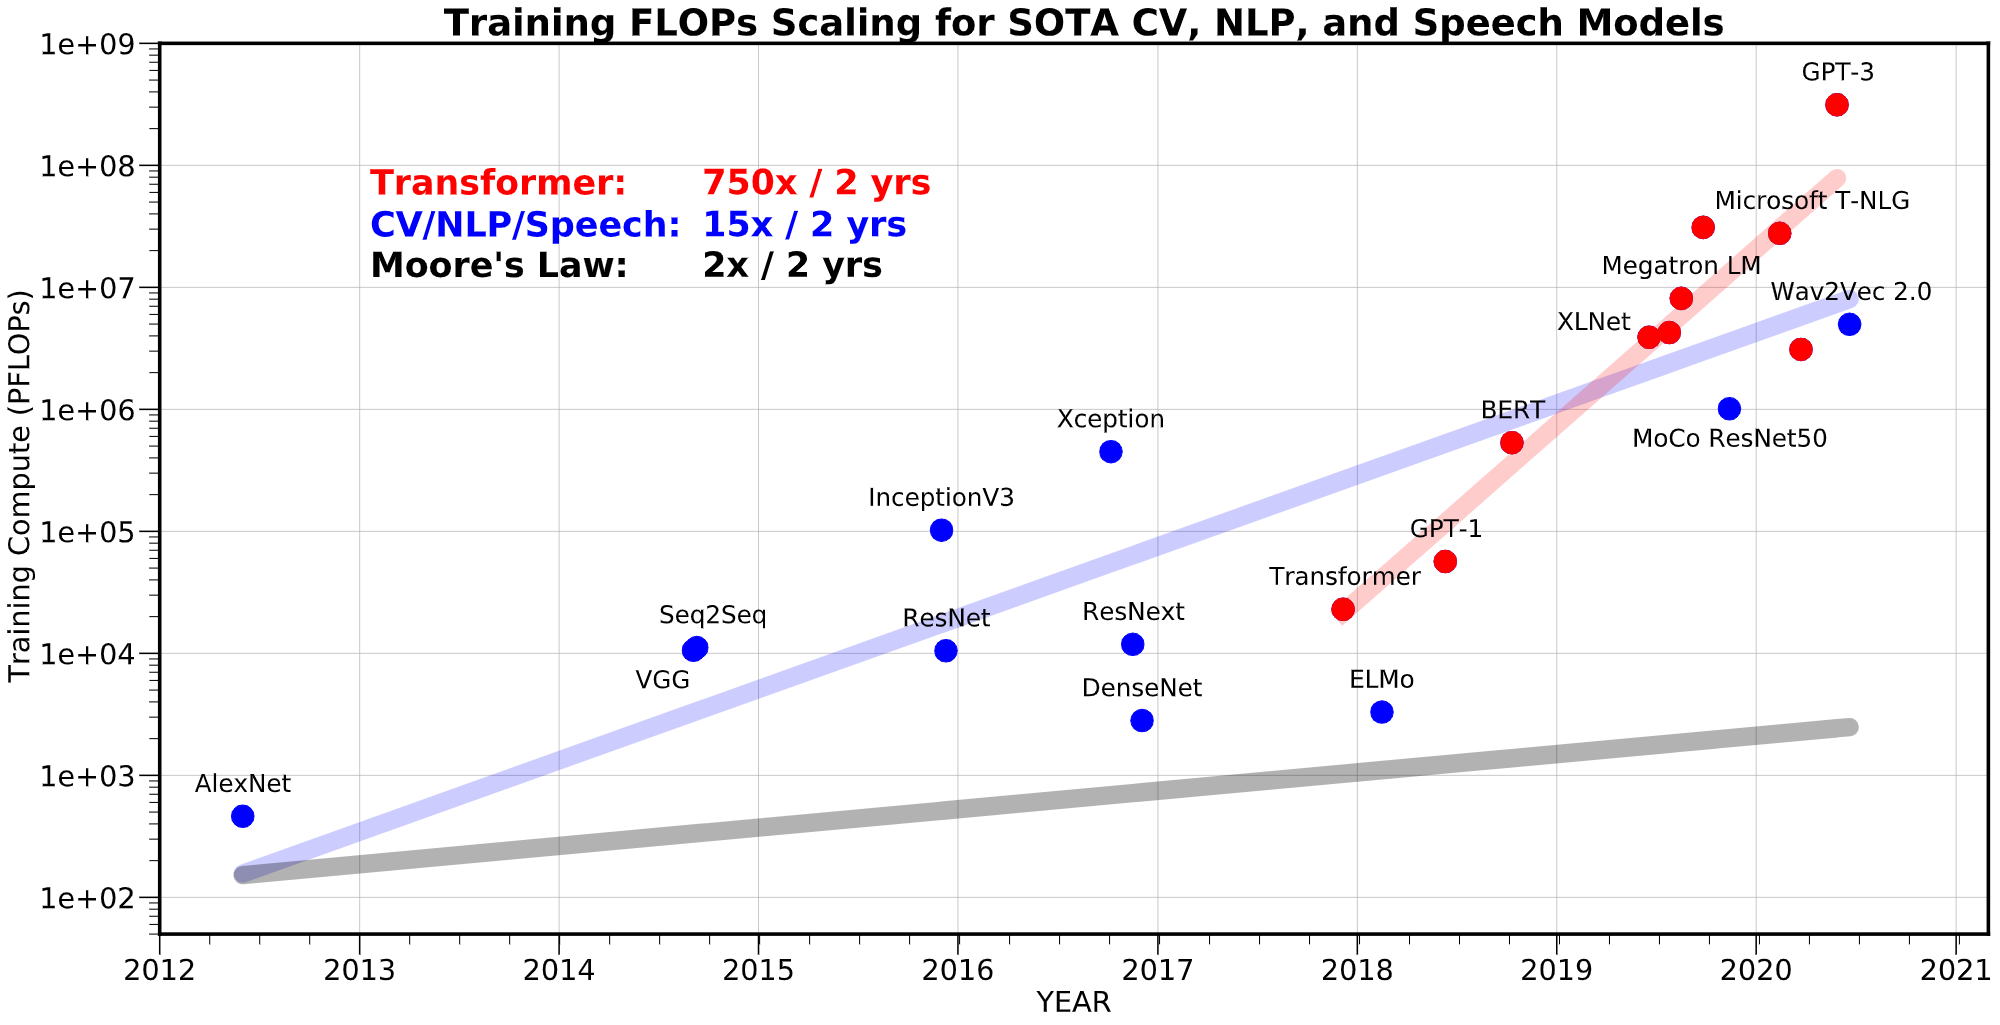 Figure 1. How Transformer large language models are scaling at a much faster rate (750 times every two years) than Moore’s Law - compute performance doubling every two years. [1]